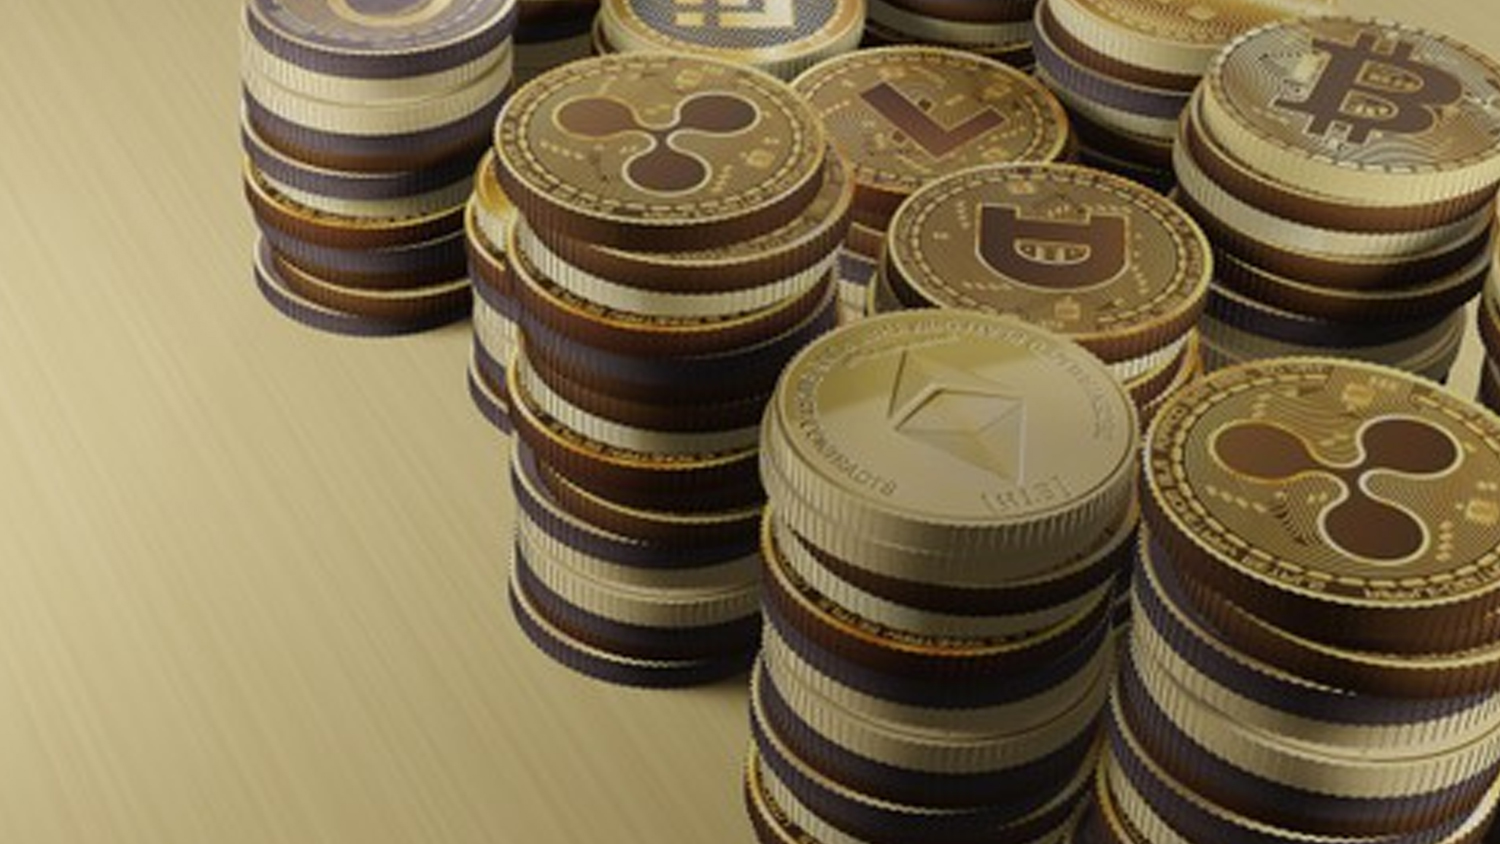 piles of physical gold coins with various crypto logos embossed on them fill up half the image on the right